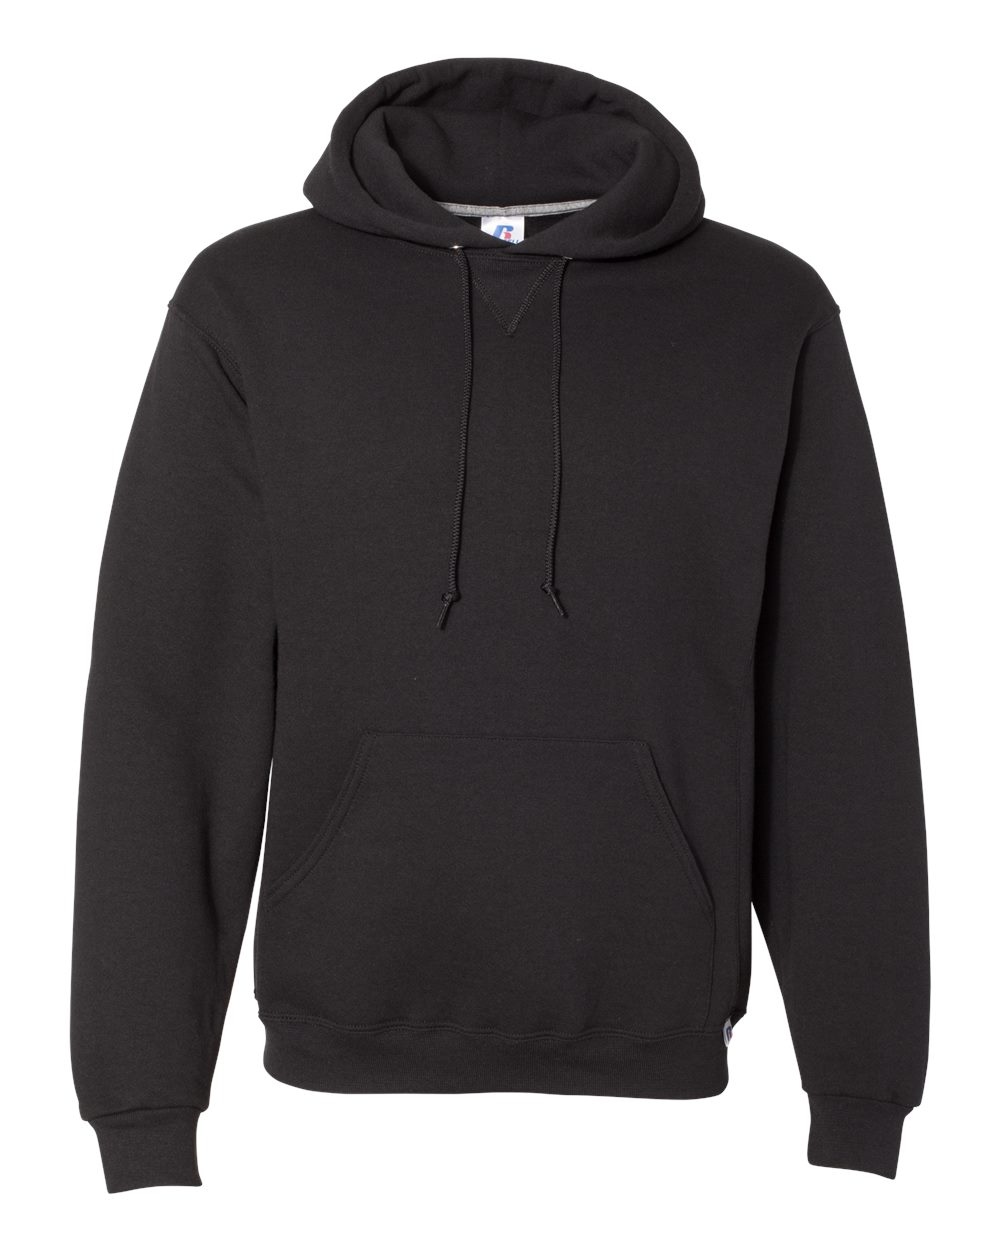 Russell Athletic Blank Plain Hooded Pullover Sweatshirt 695HBM up to ...